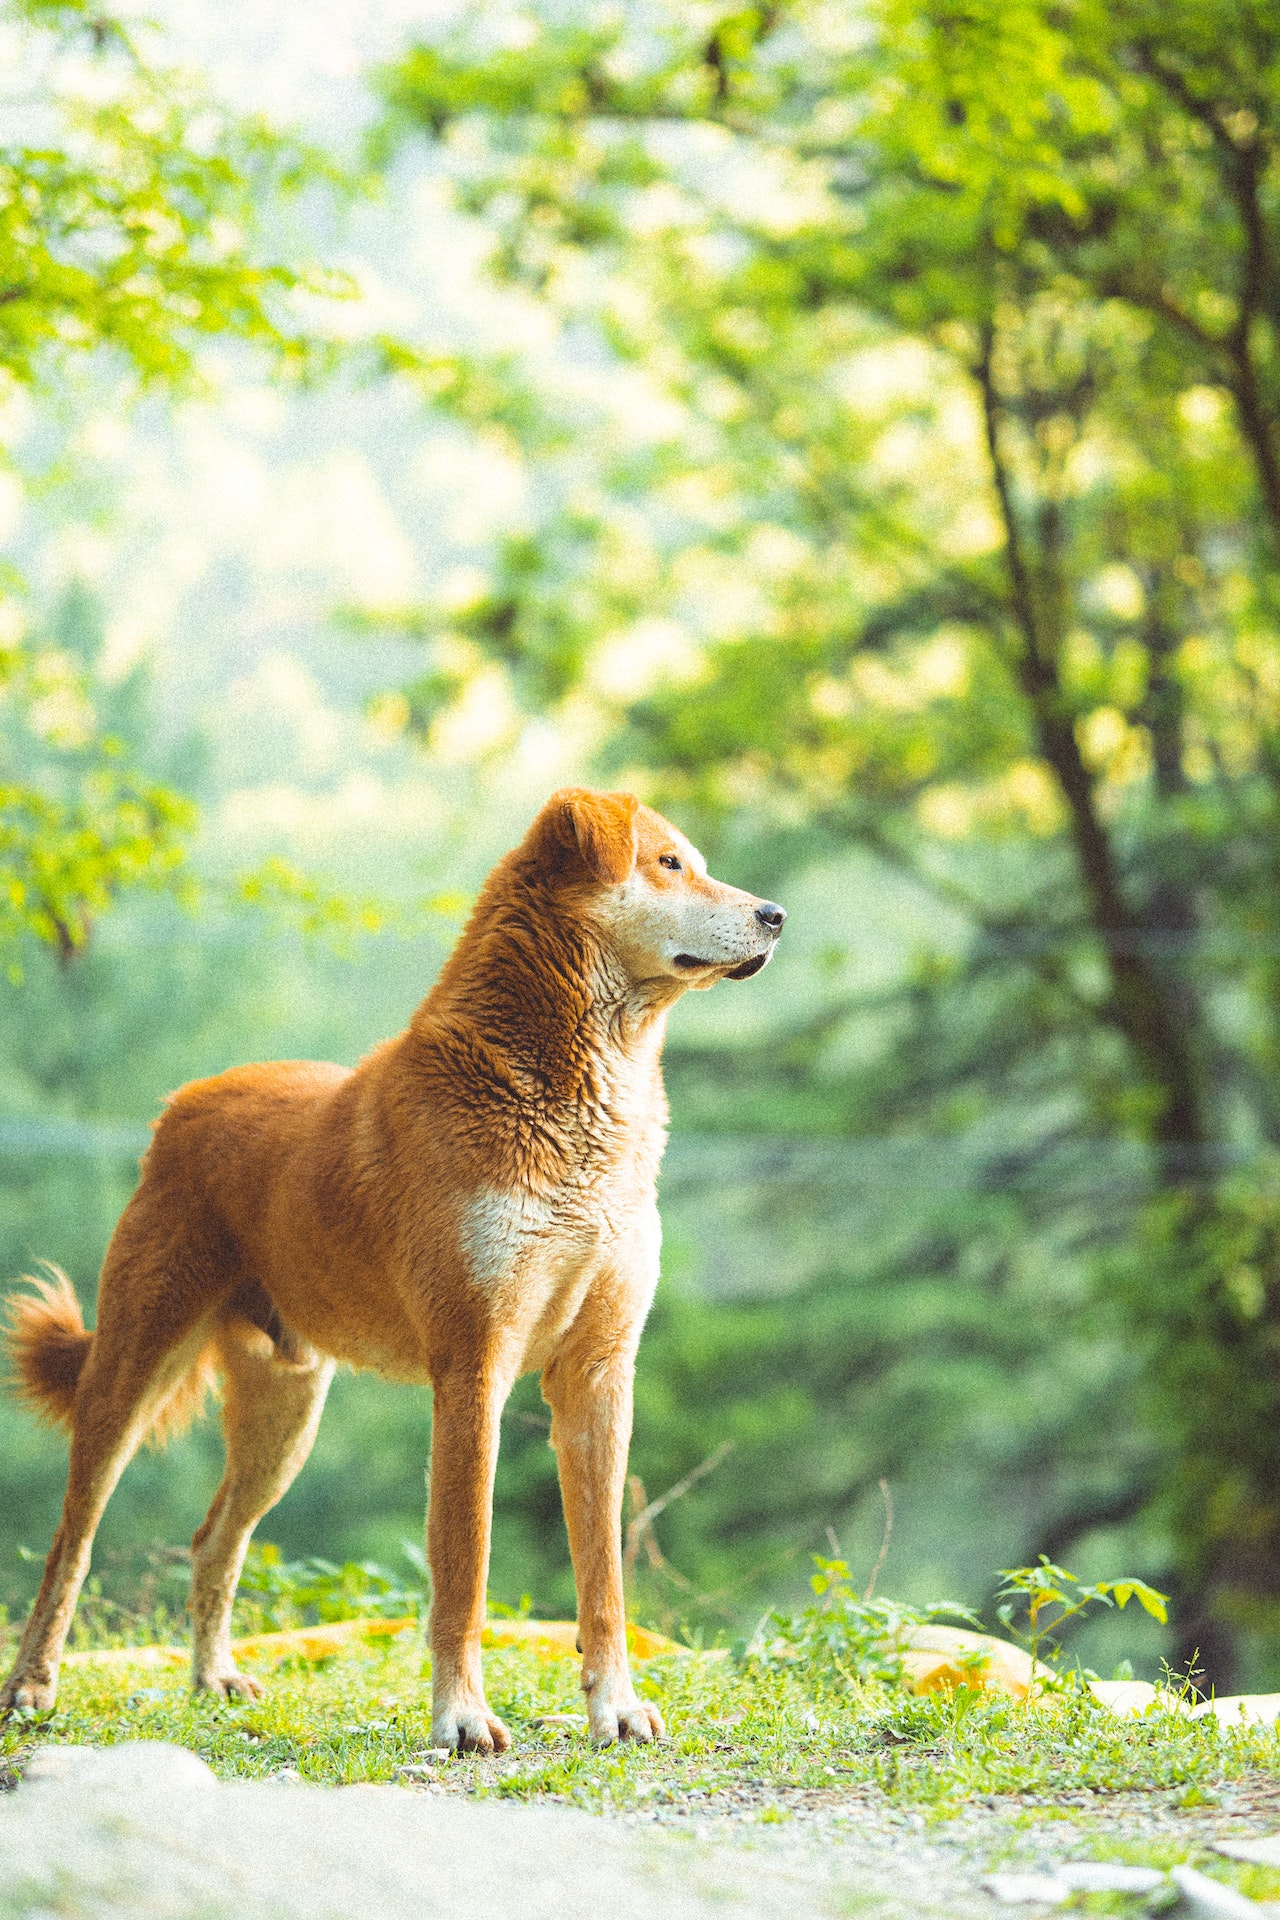 Choosing the Perfect Name for Your Canine Companion